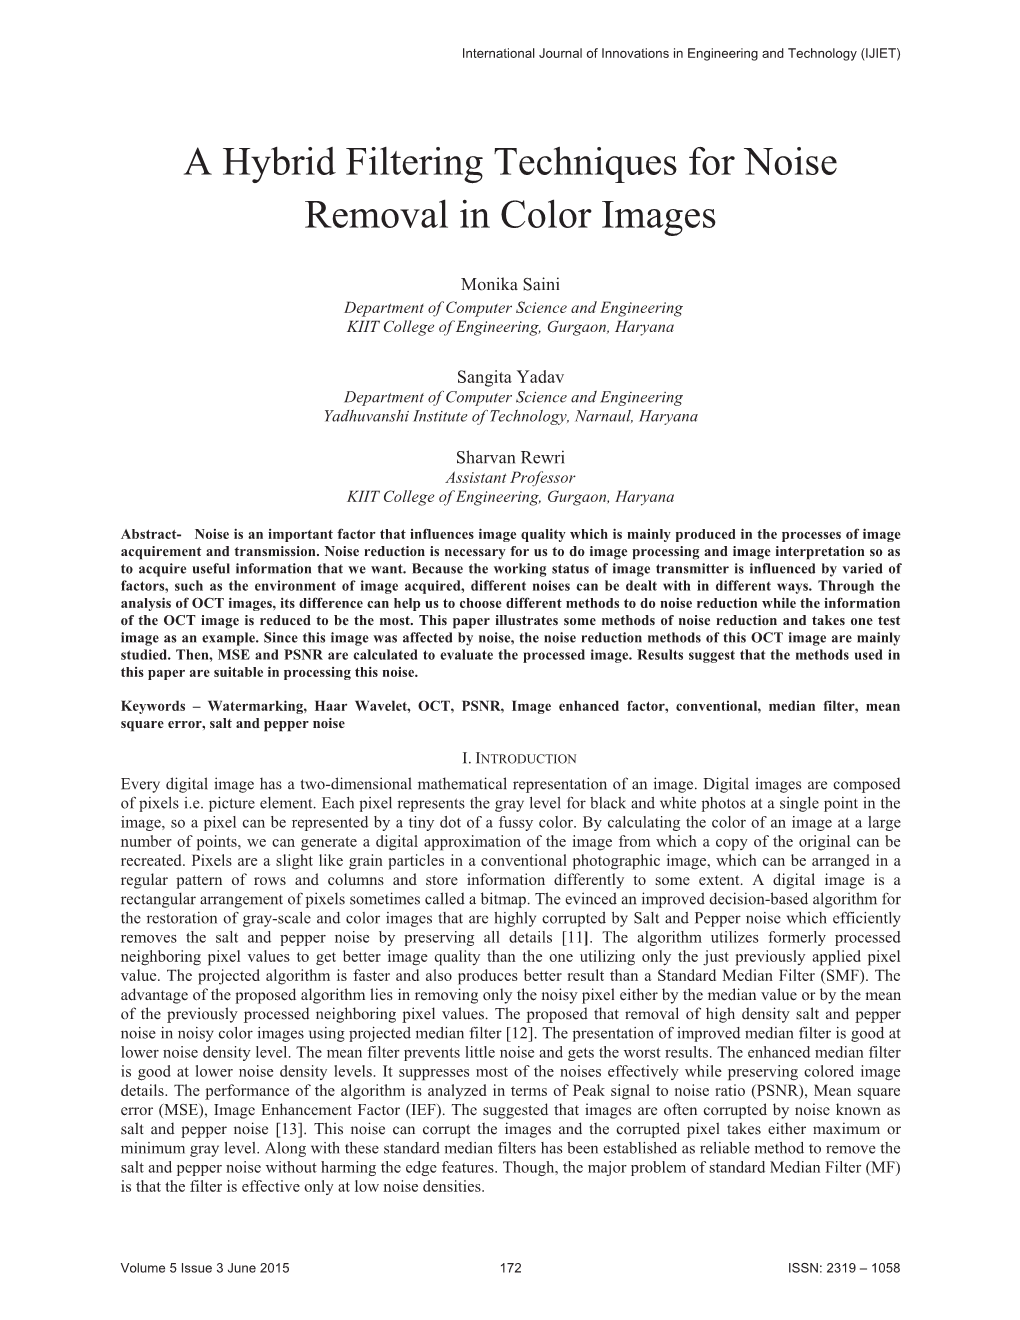 A Hybrid Filtering Techniques for Noise Removal in Color Images